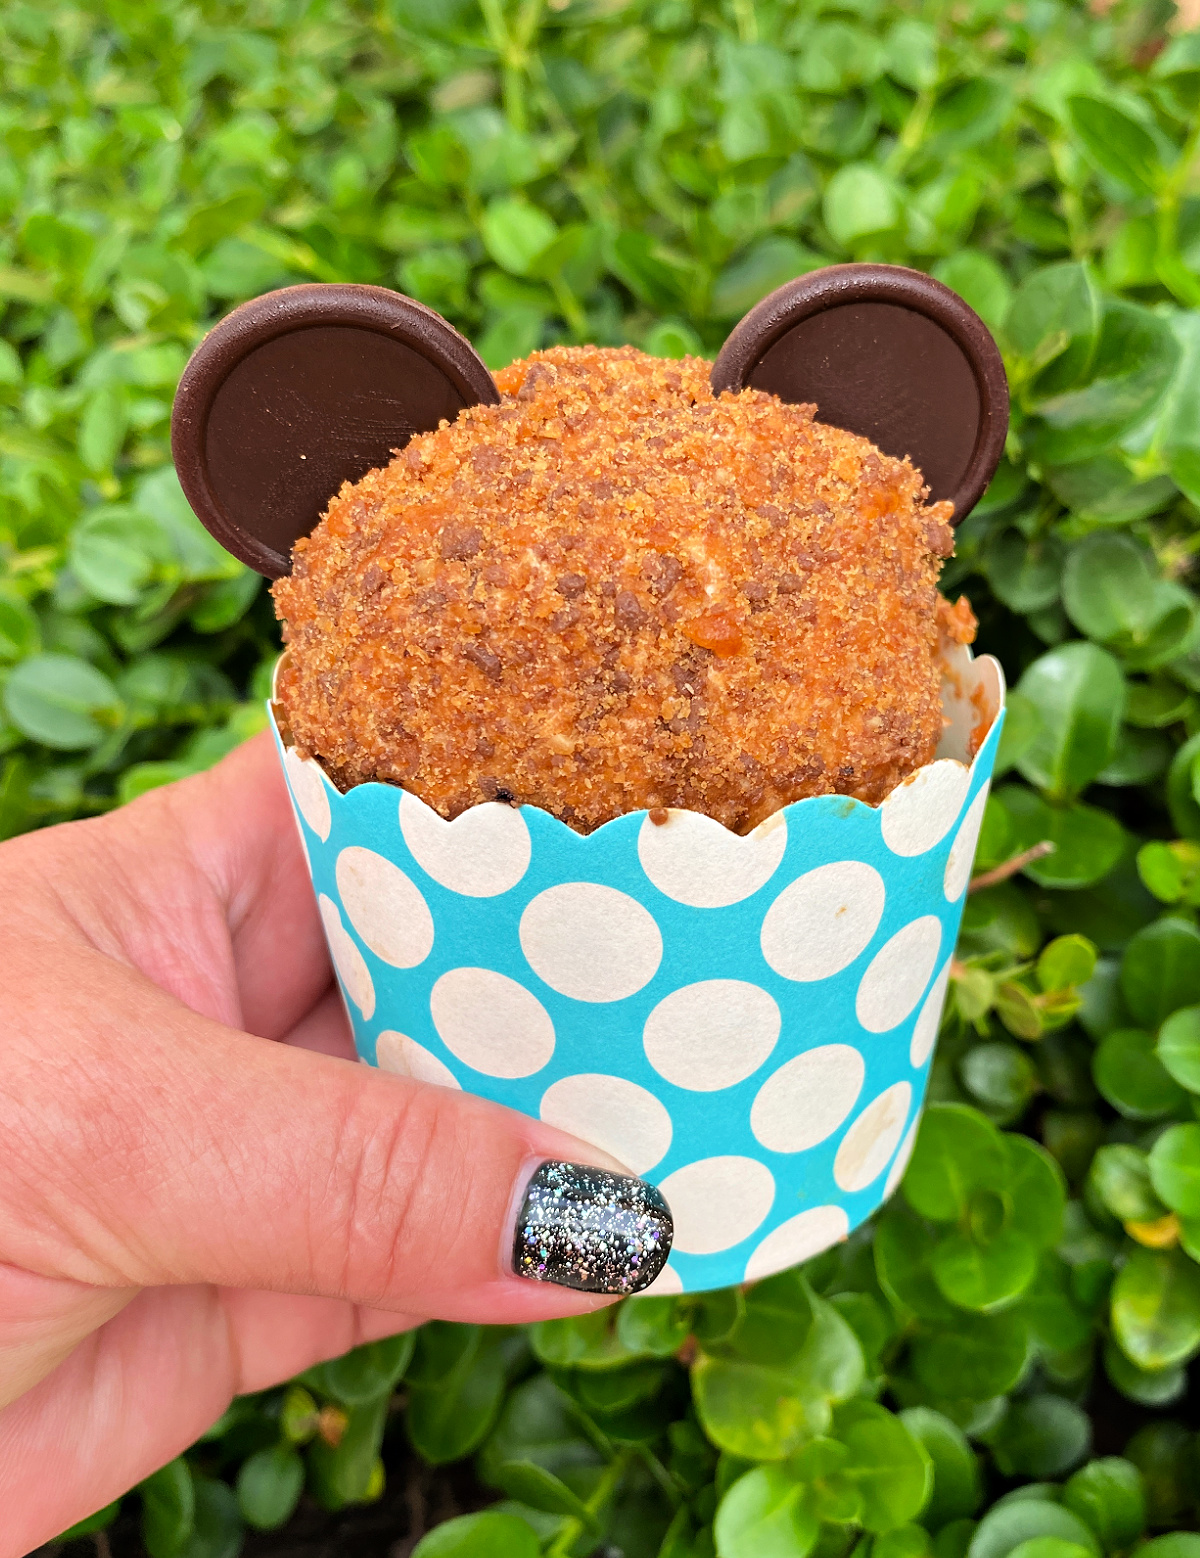 Mickey Mouse Cupcake